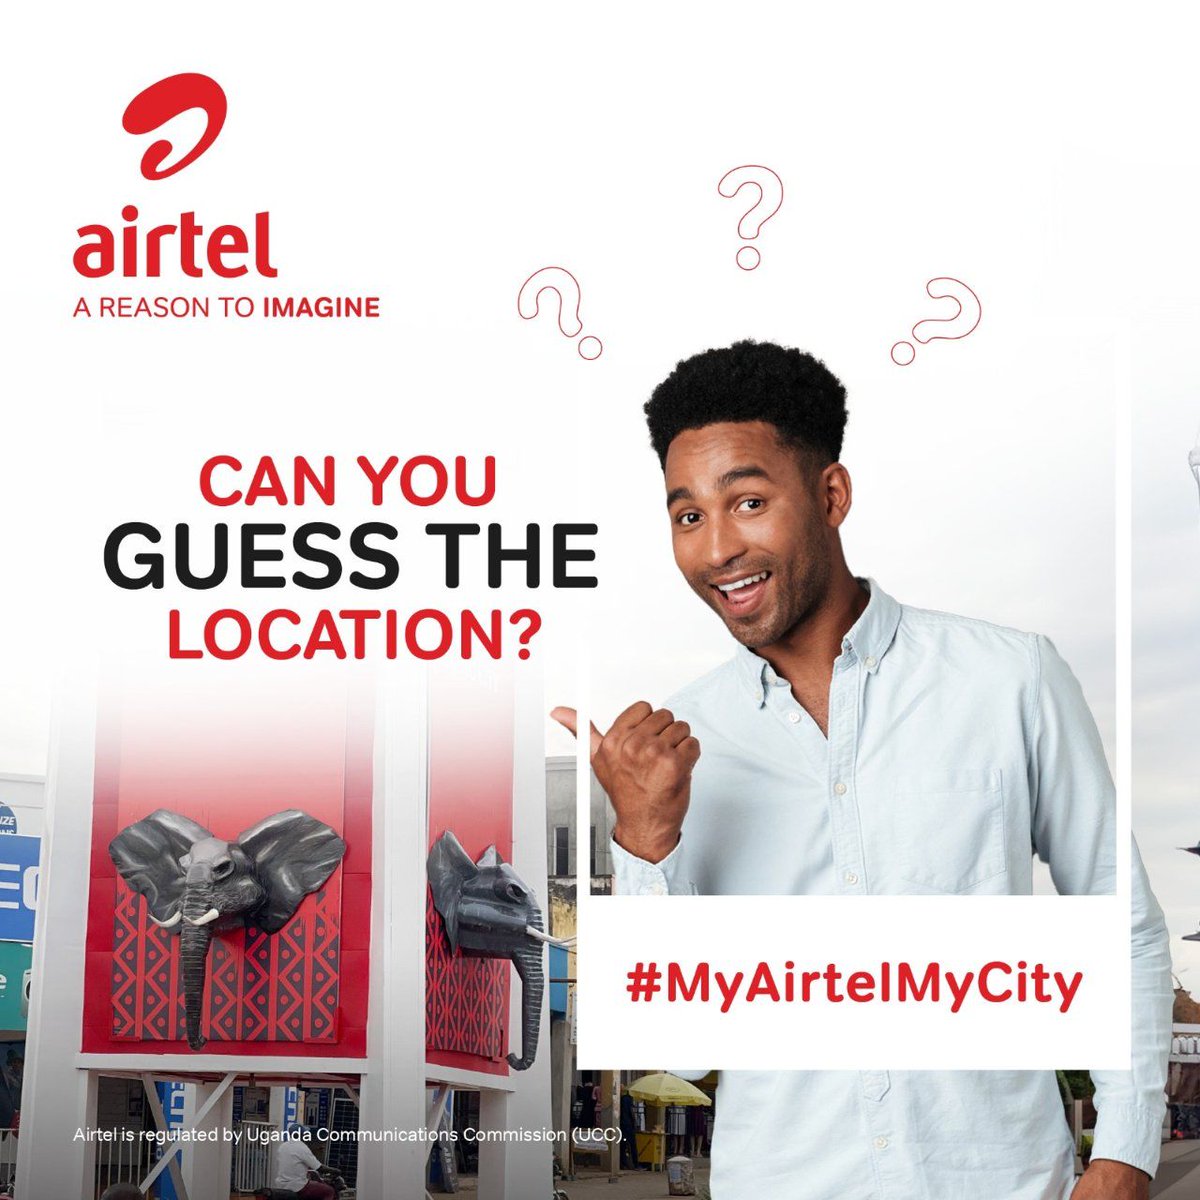 This looks simple. Just guess the location of the Airtel clock tower and stand a chance to win 5.5gb weekly data bundle #MyAirtelMyCity